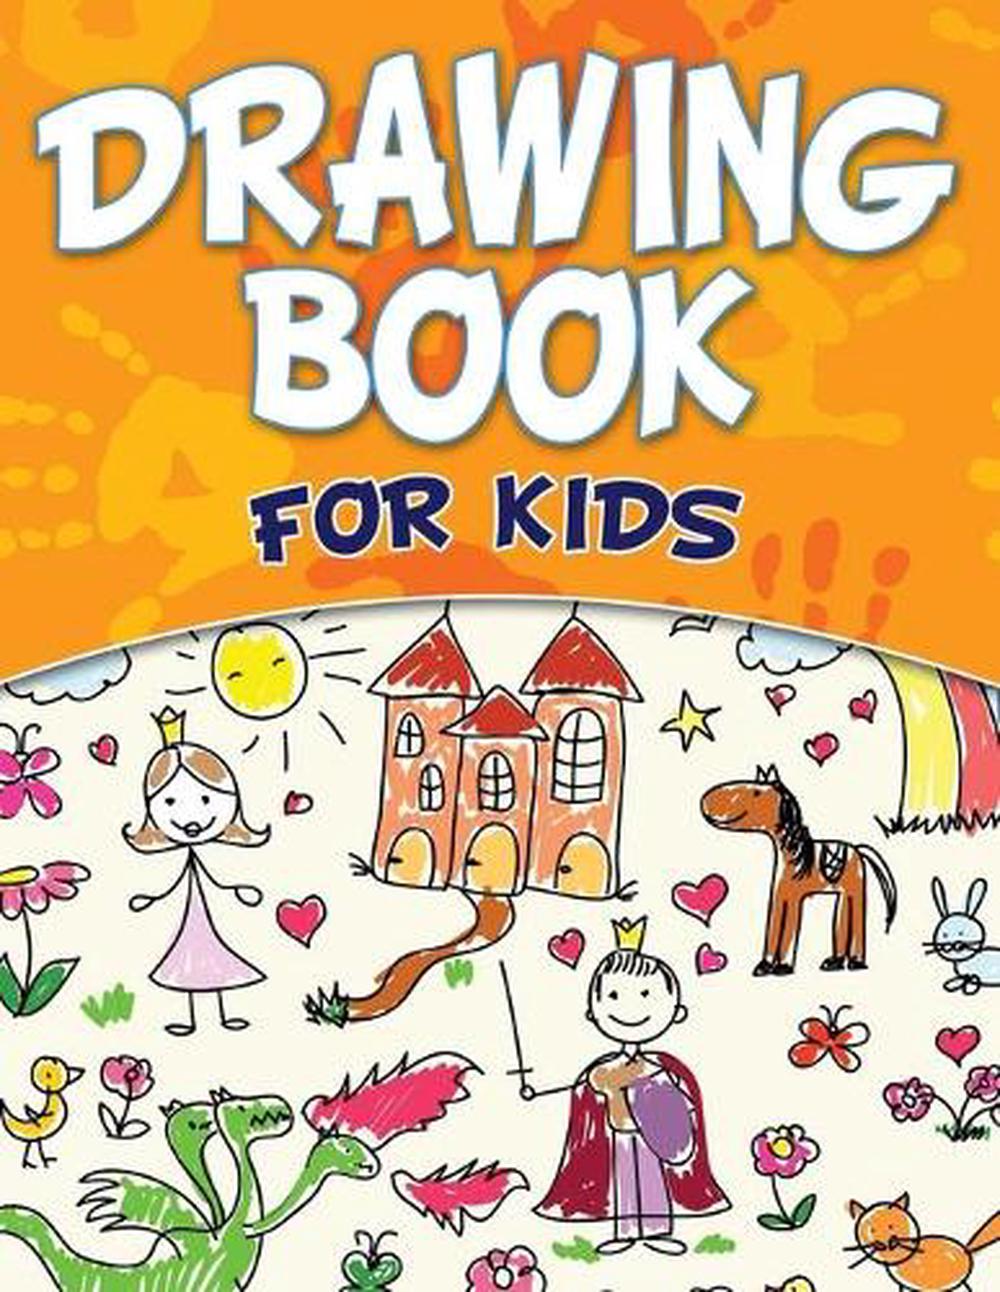 Drawing Book For Kids by Speedy Publishing LLC (English) Paperback Book